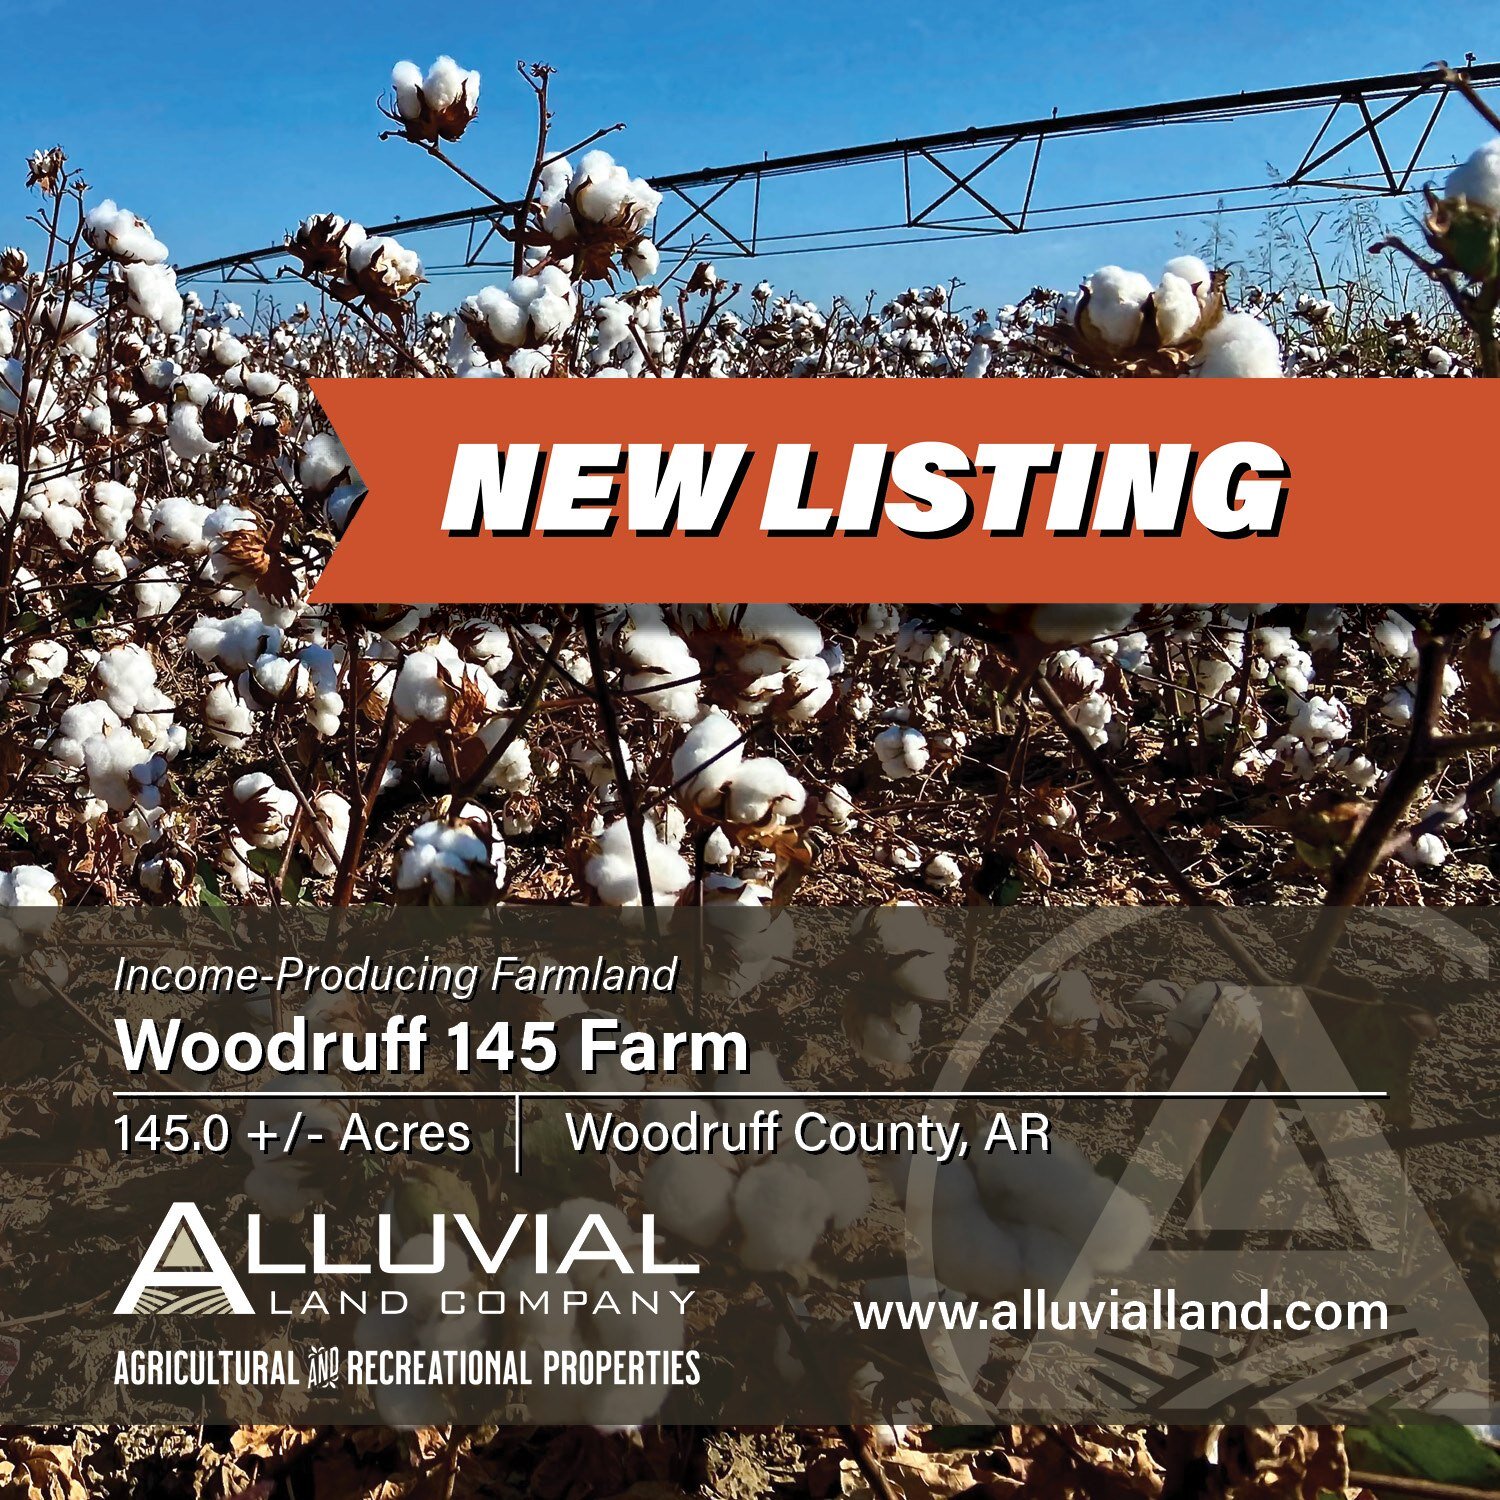 NEW LISTING
Offered for sale, the Woodruff 145 Farm, located two miles south of McCrory, Arkansas, in Woodruff County. The property is 145.0 +/- total acres with 120.0 +/- acres of income-producing farmland. The land has excellent access via Woodruff